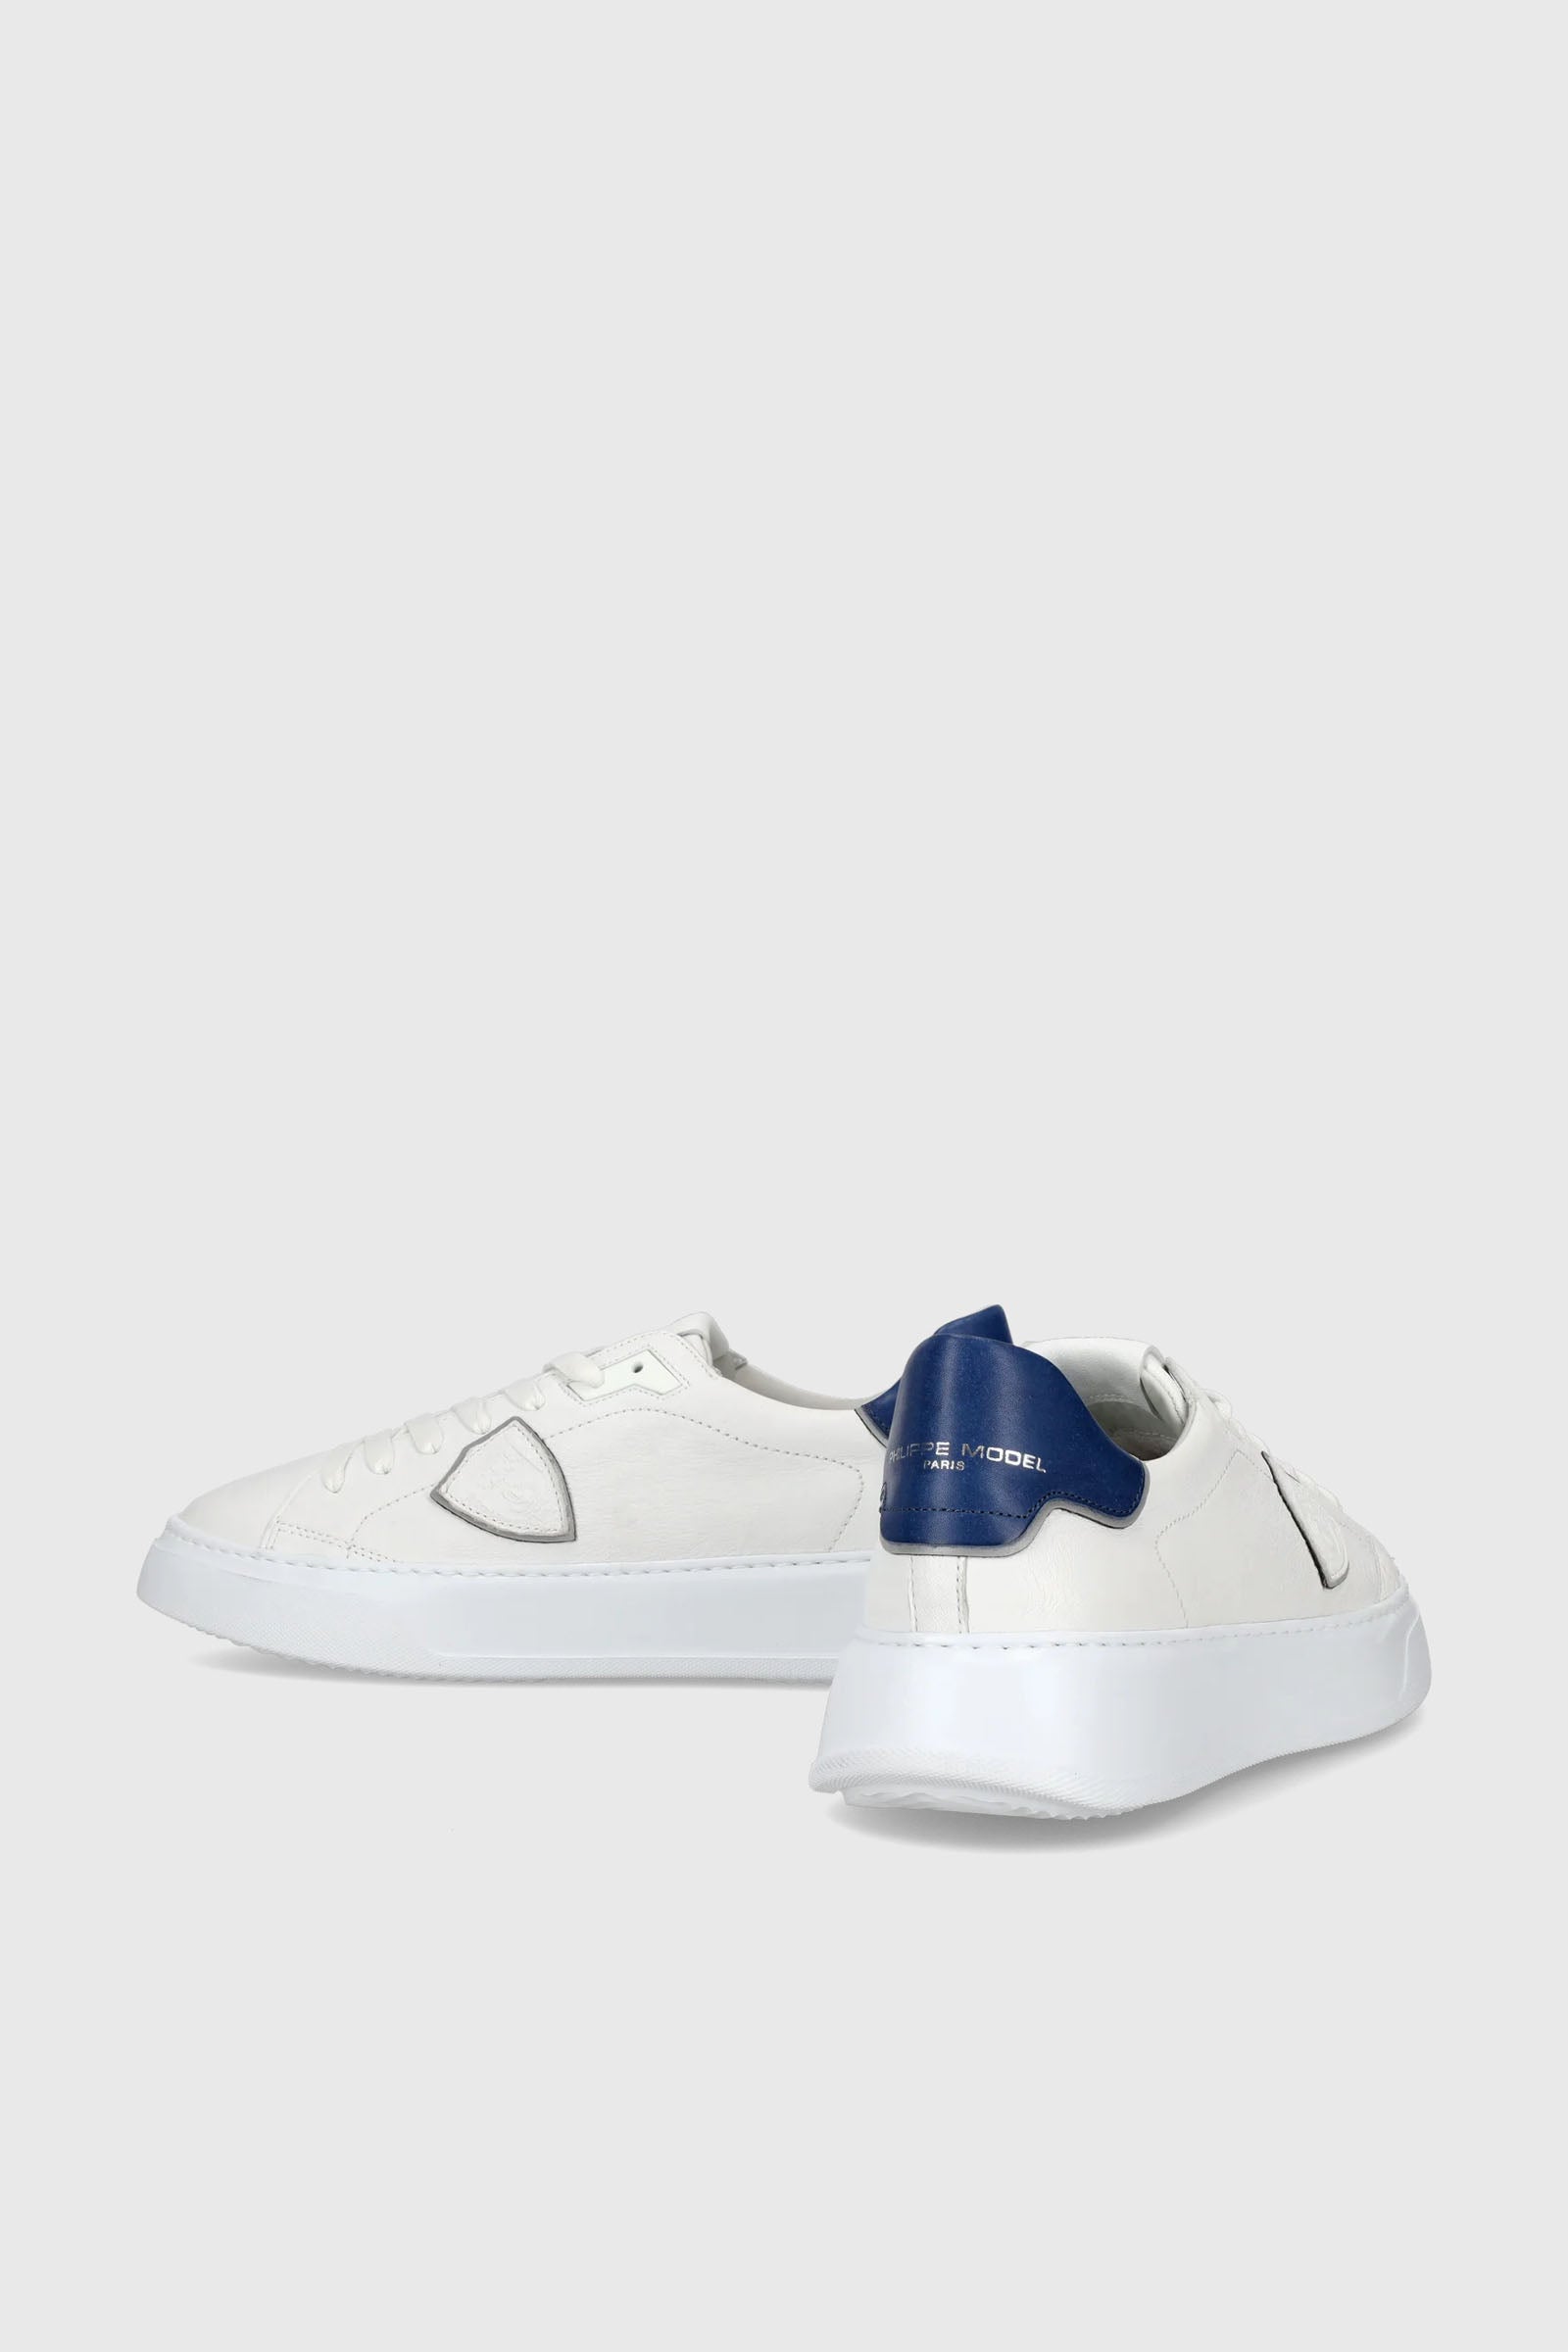 Philippe Model Sneaker Temple West Leather White/Blue - 4